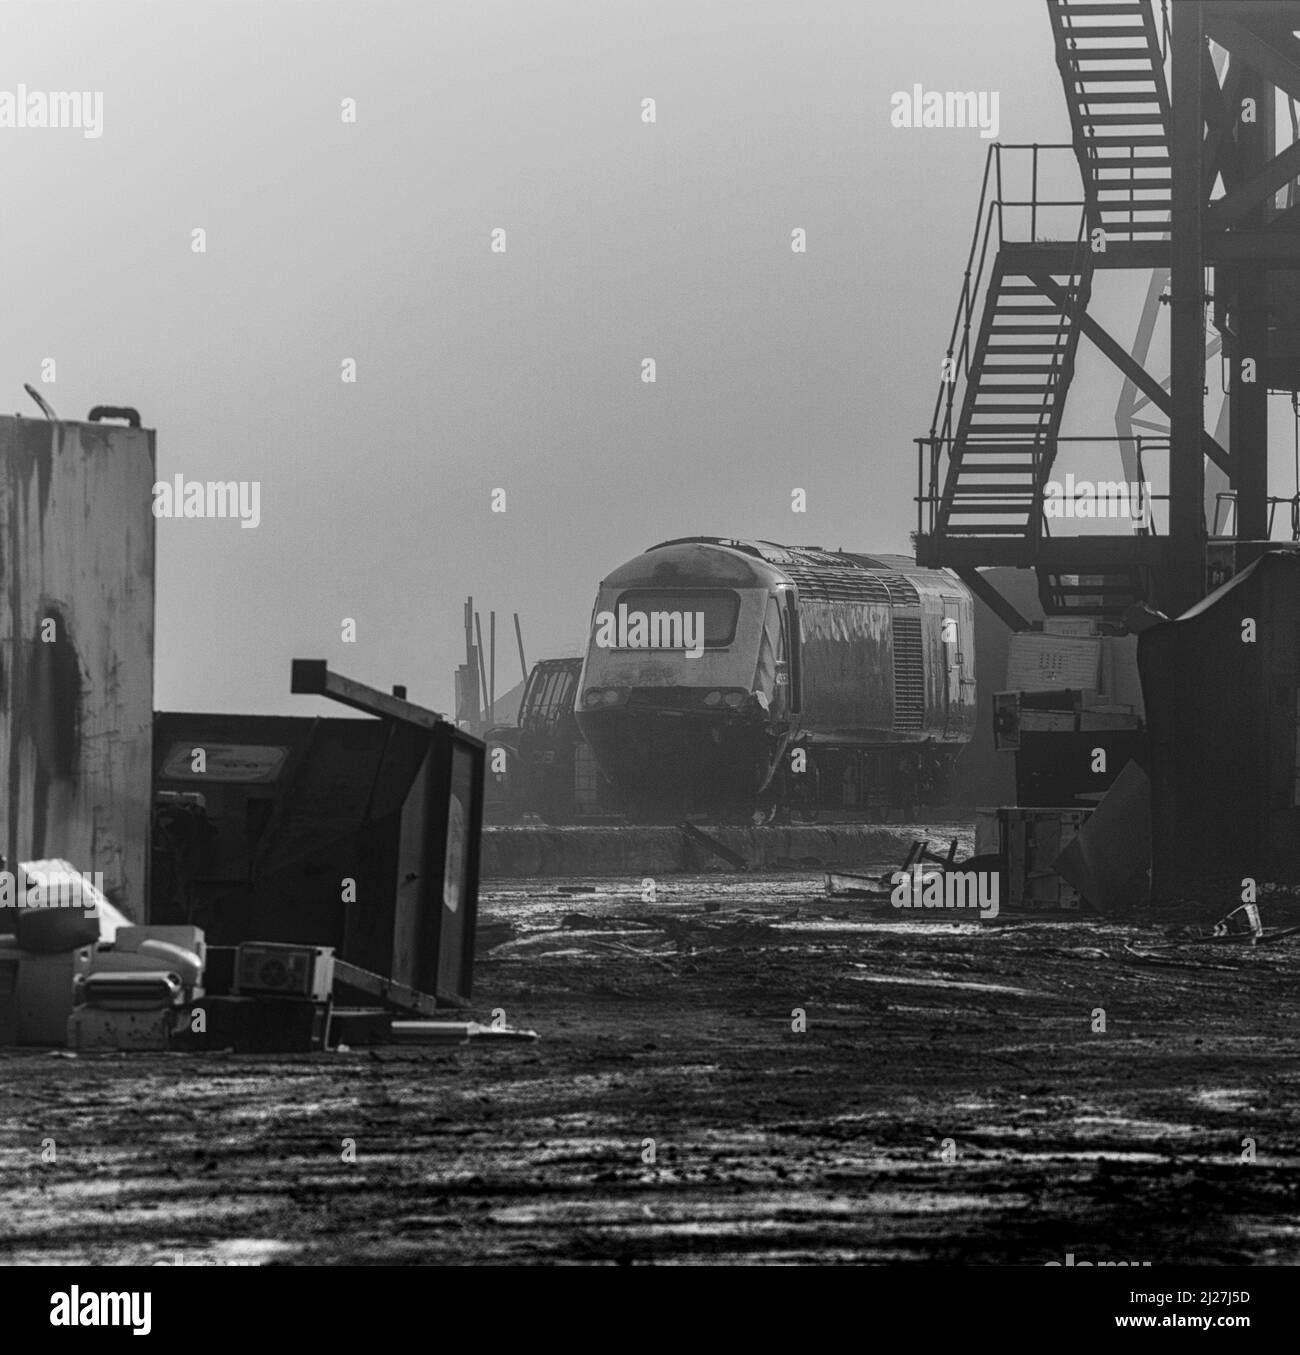 Withdrawn high speed train power car 43053 in the mist at Sims Metals, Newport docks, south Wales waiting to be cut up for scrap Stock Photo